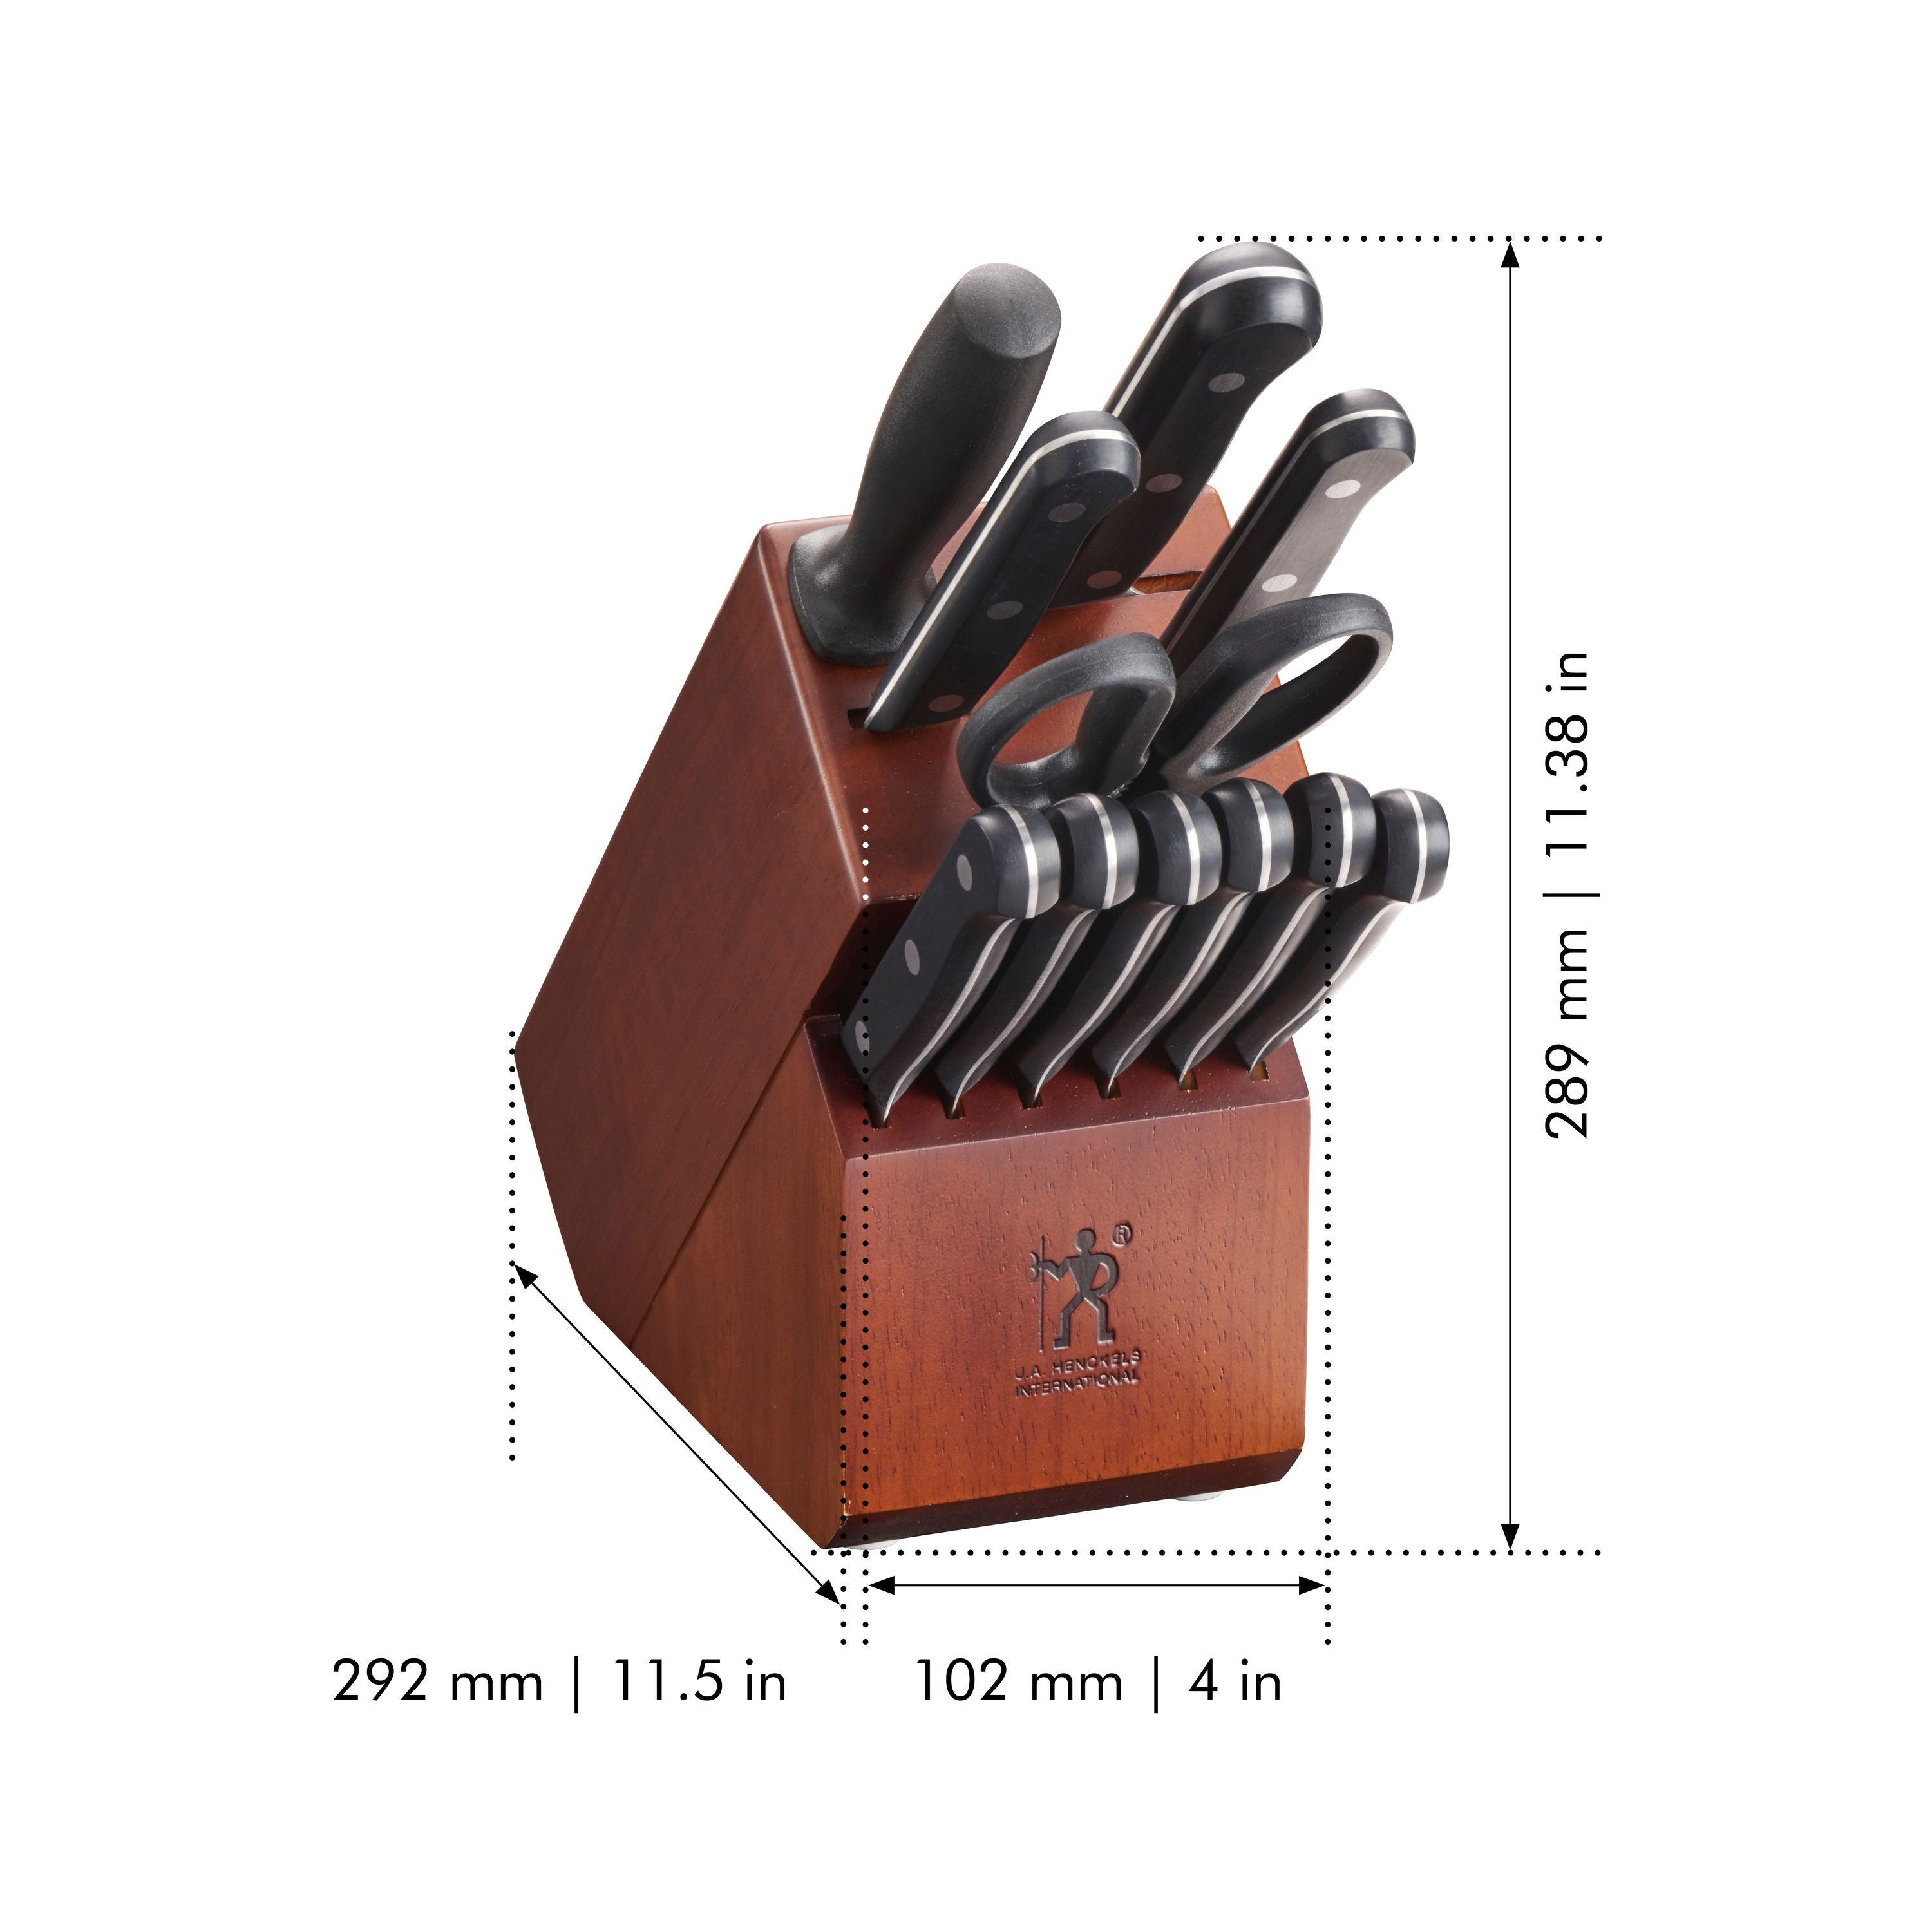 All-Clad Forged 12-Piece Knife Block Set